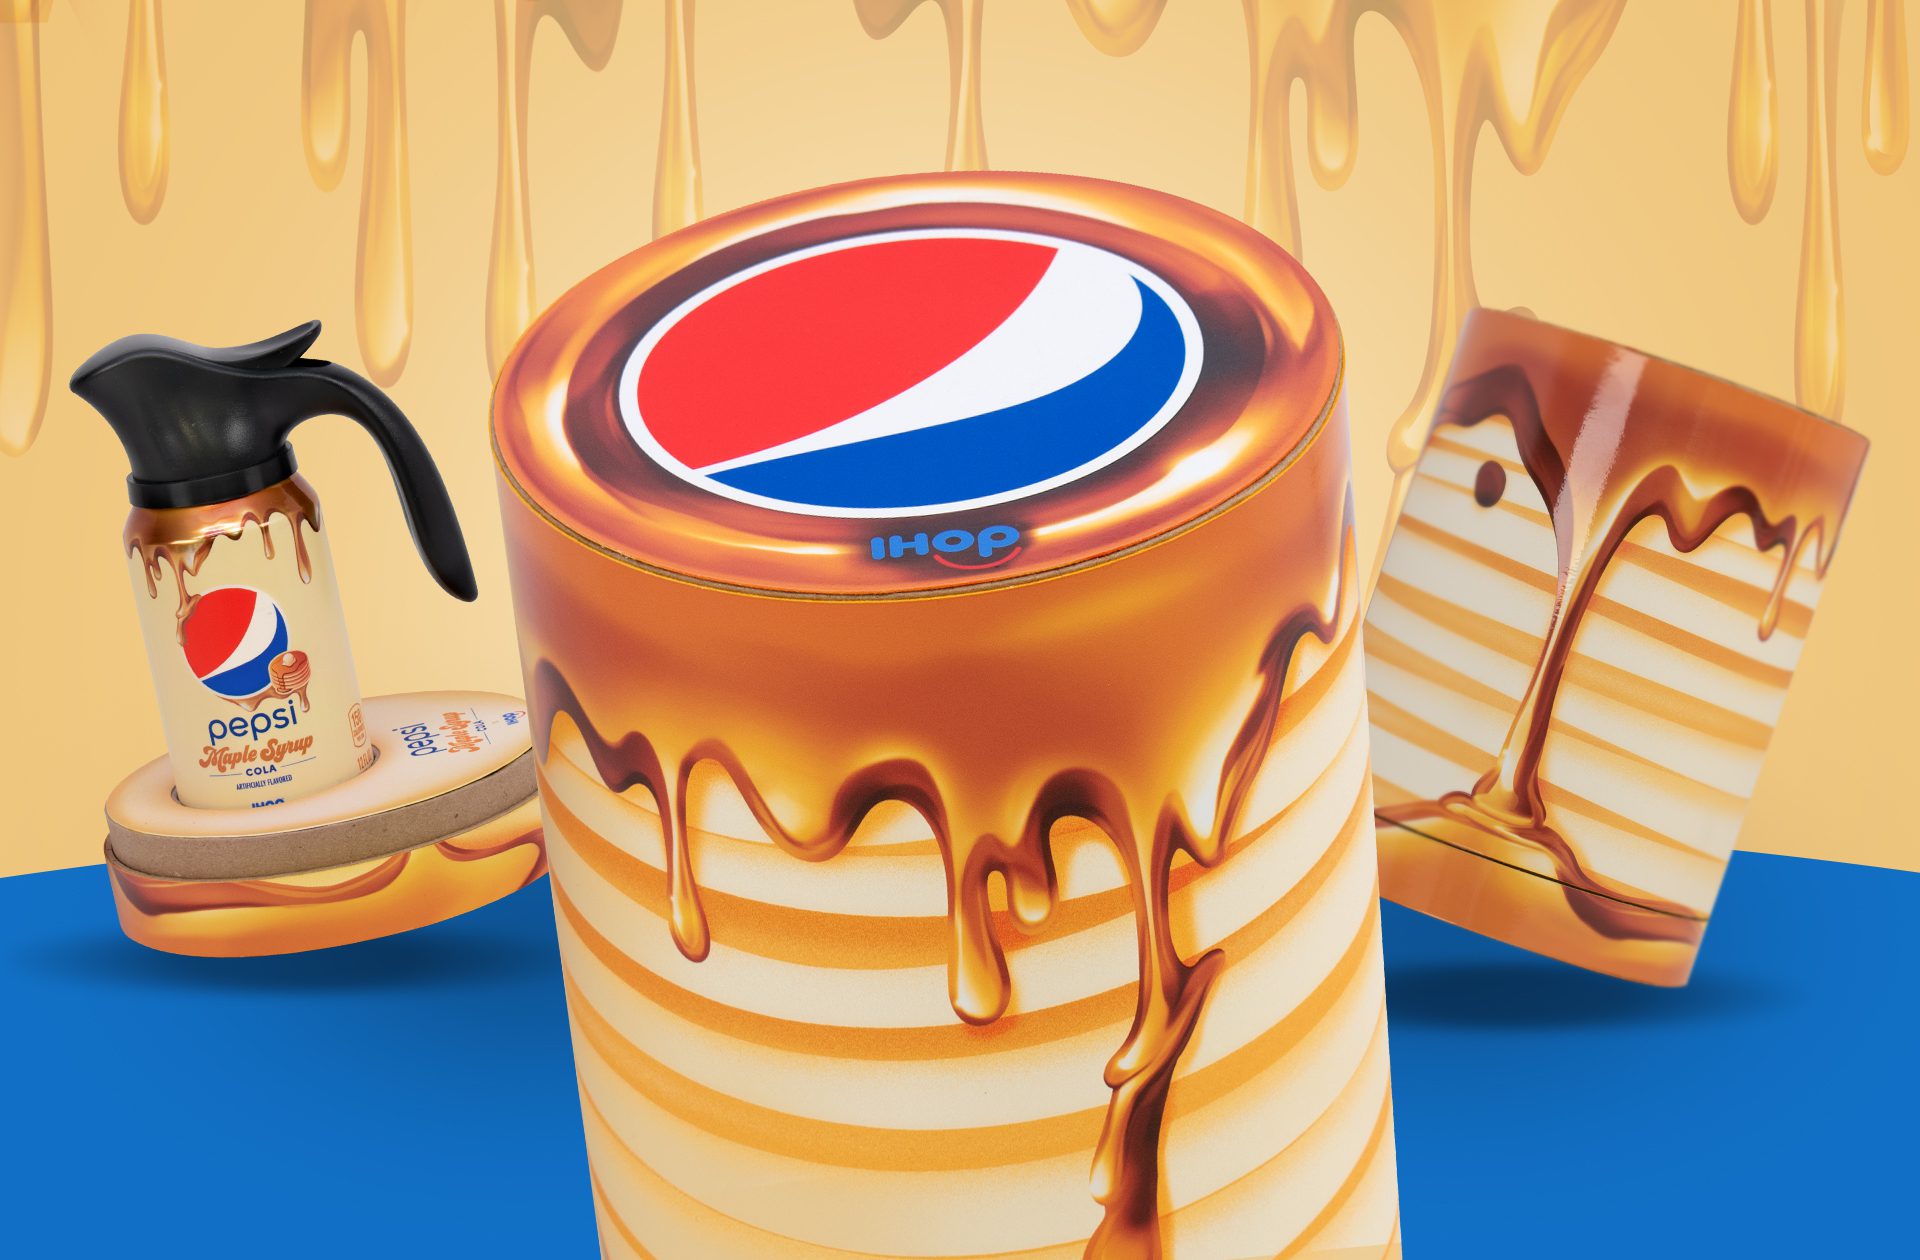 Photograph of an influencer unboxing experience promoting the limited edition IHOP x Pepsi maple syrup flavor, featuring a can of cola with a custom Pepsi Spout, inspired by the iconic IHOP syrup pitchers.